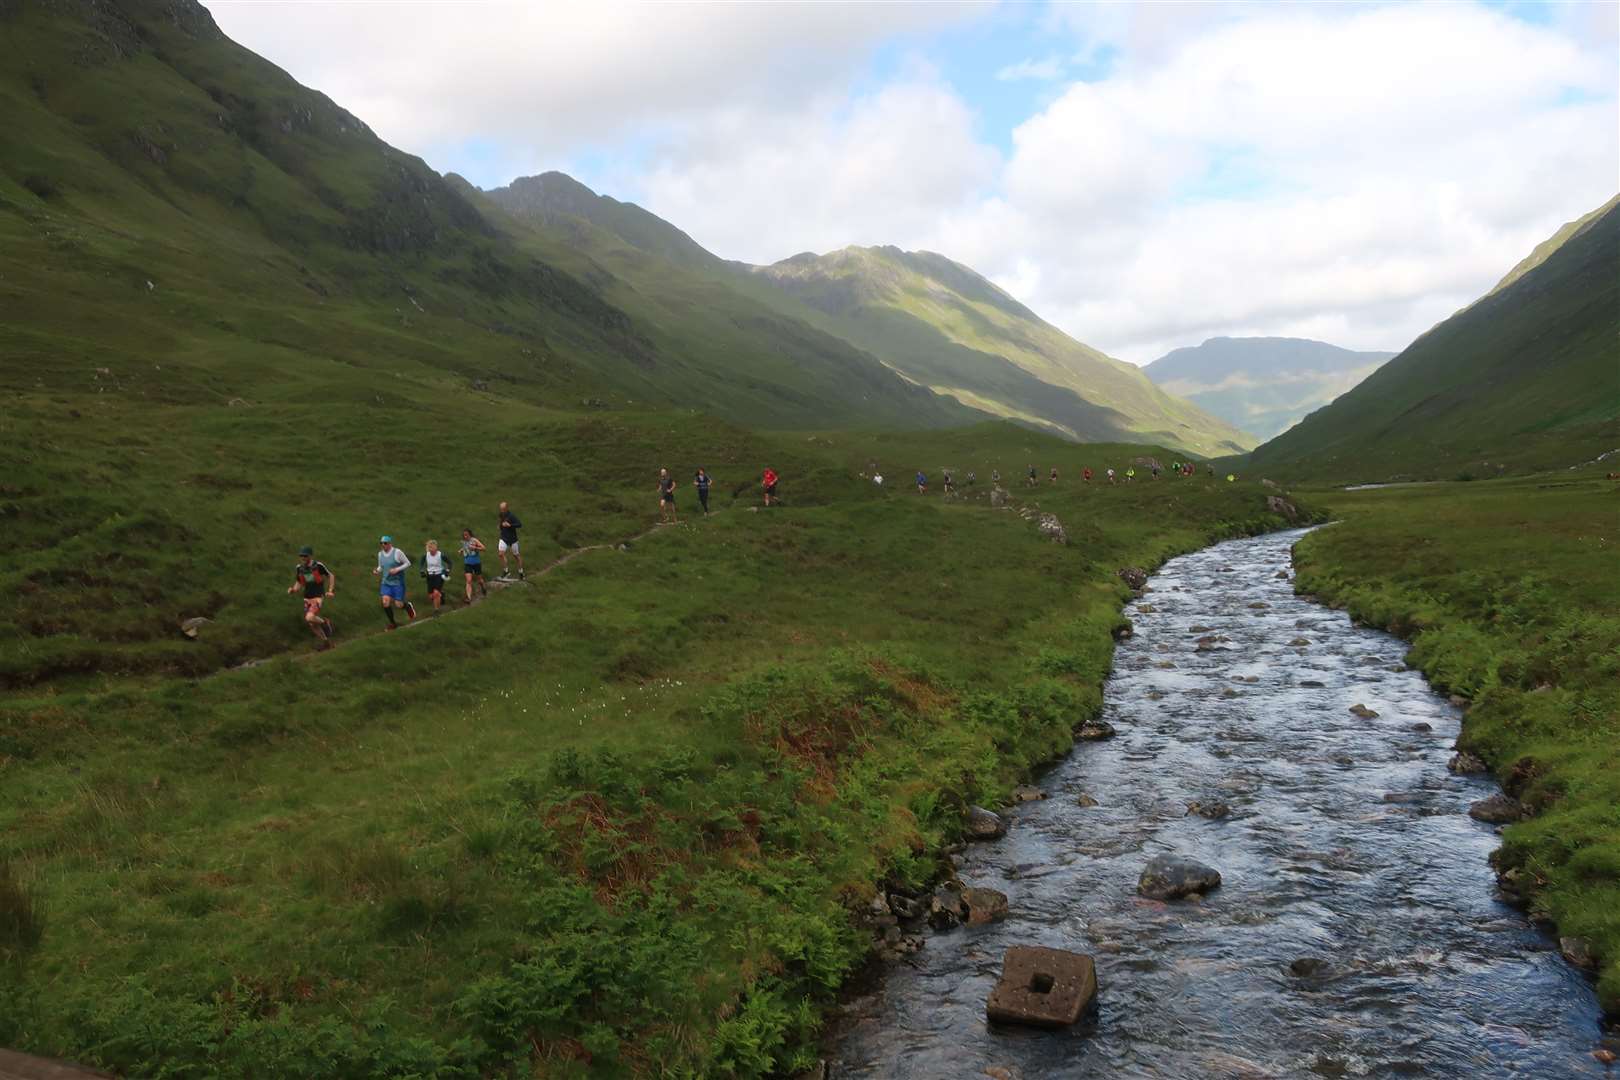 A stream of runners approaches the base of the climb.